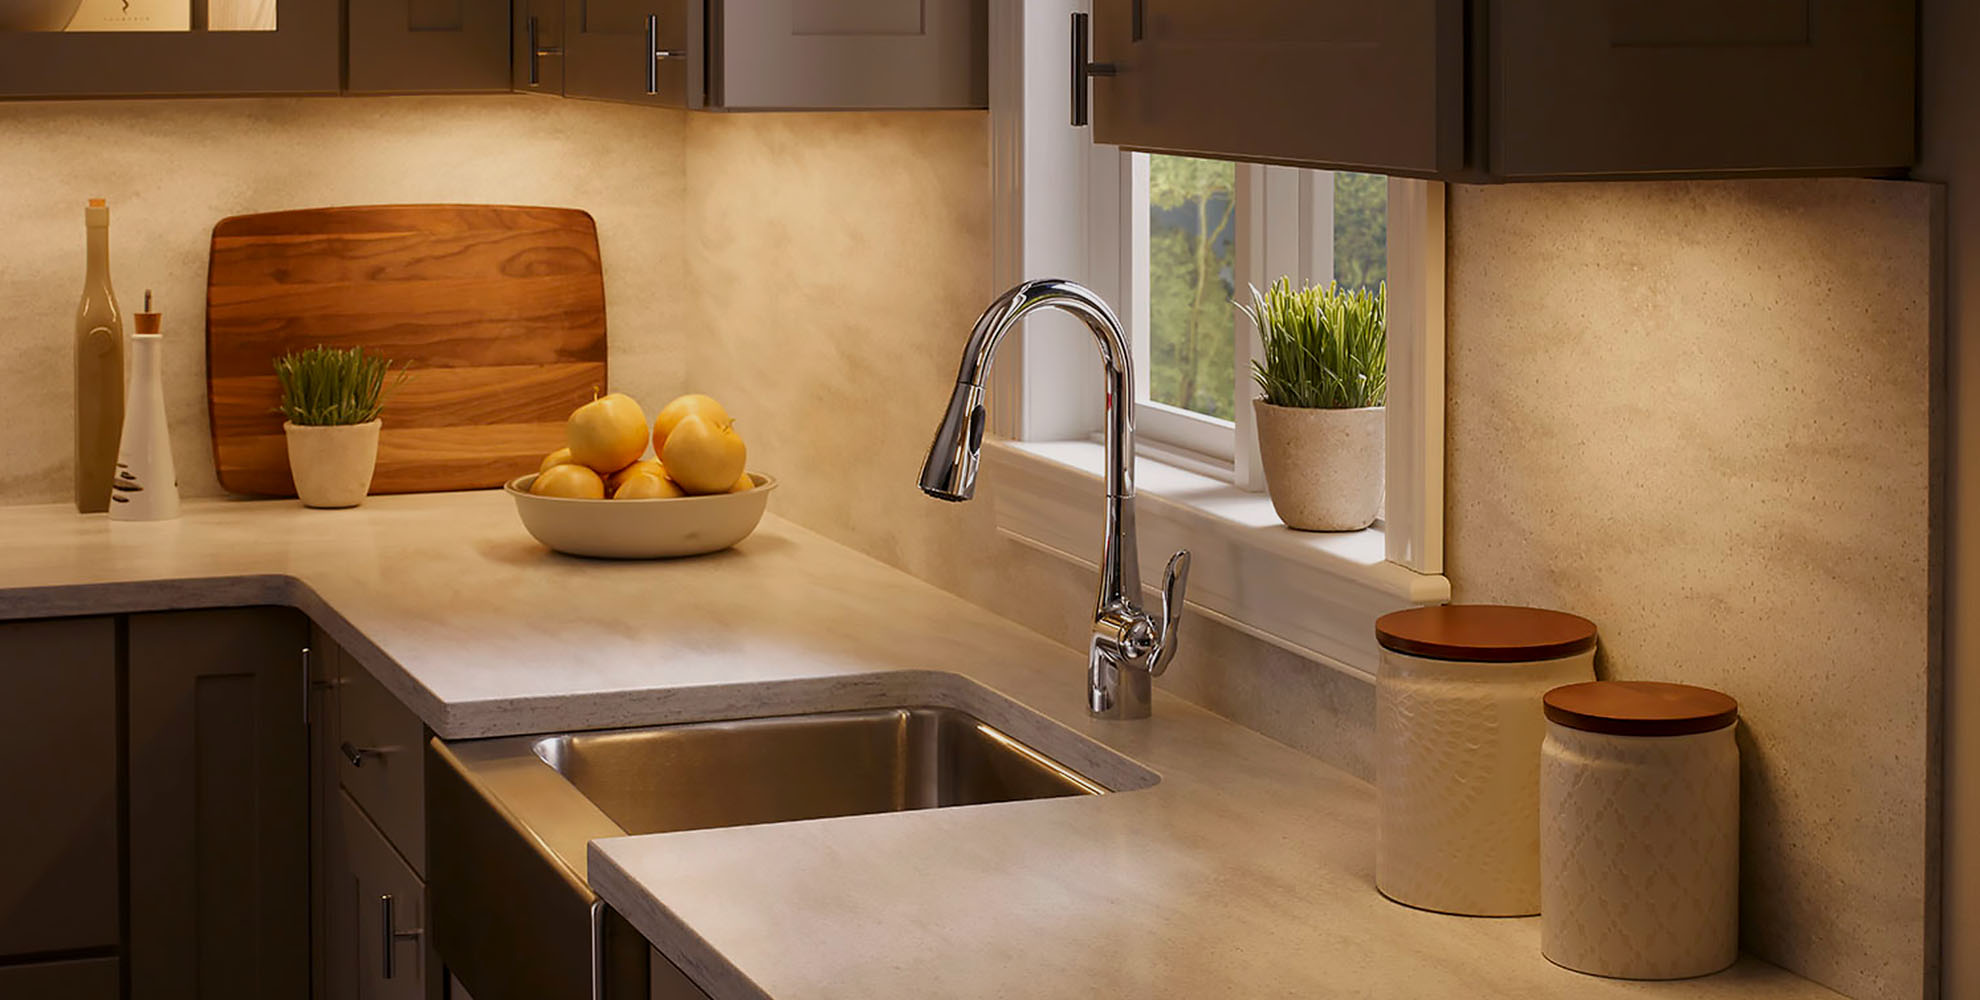 How To Choose Under Cabinet Lighting, Low Voltage Kitchen Under Cabinet Lighting